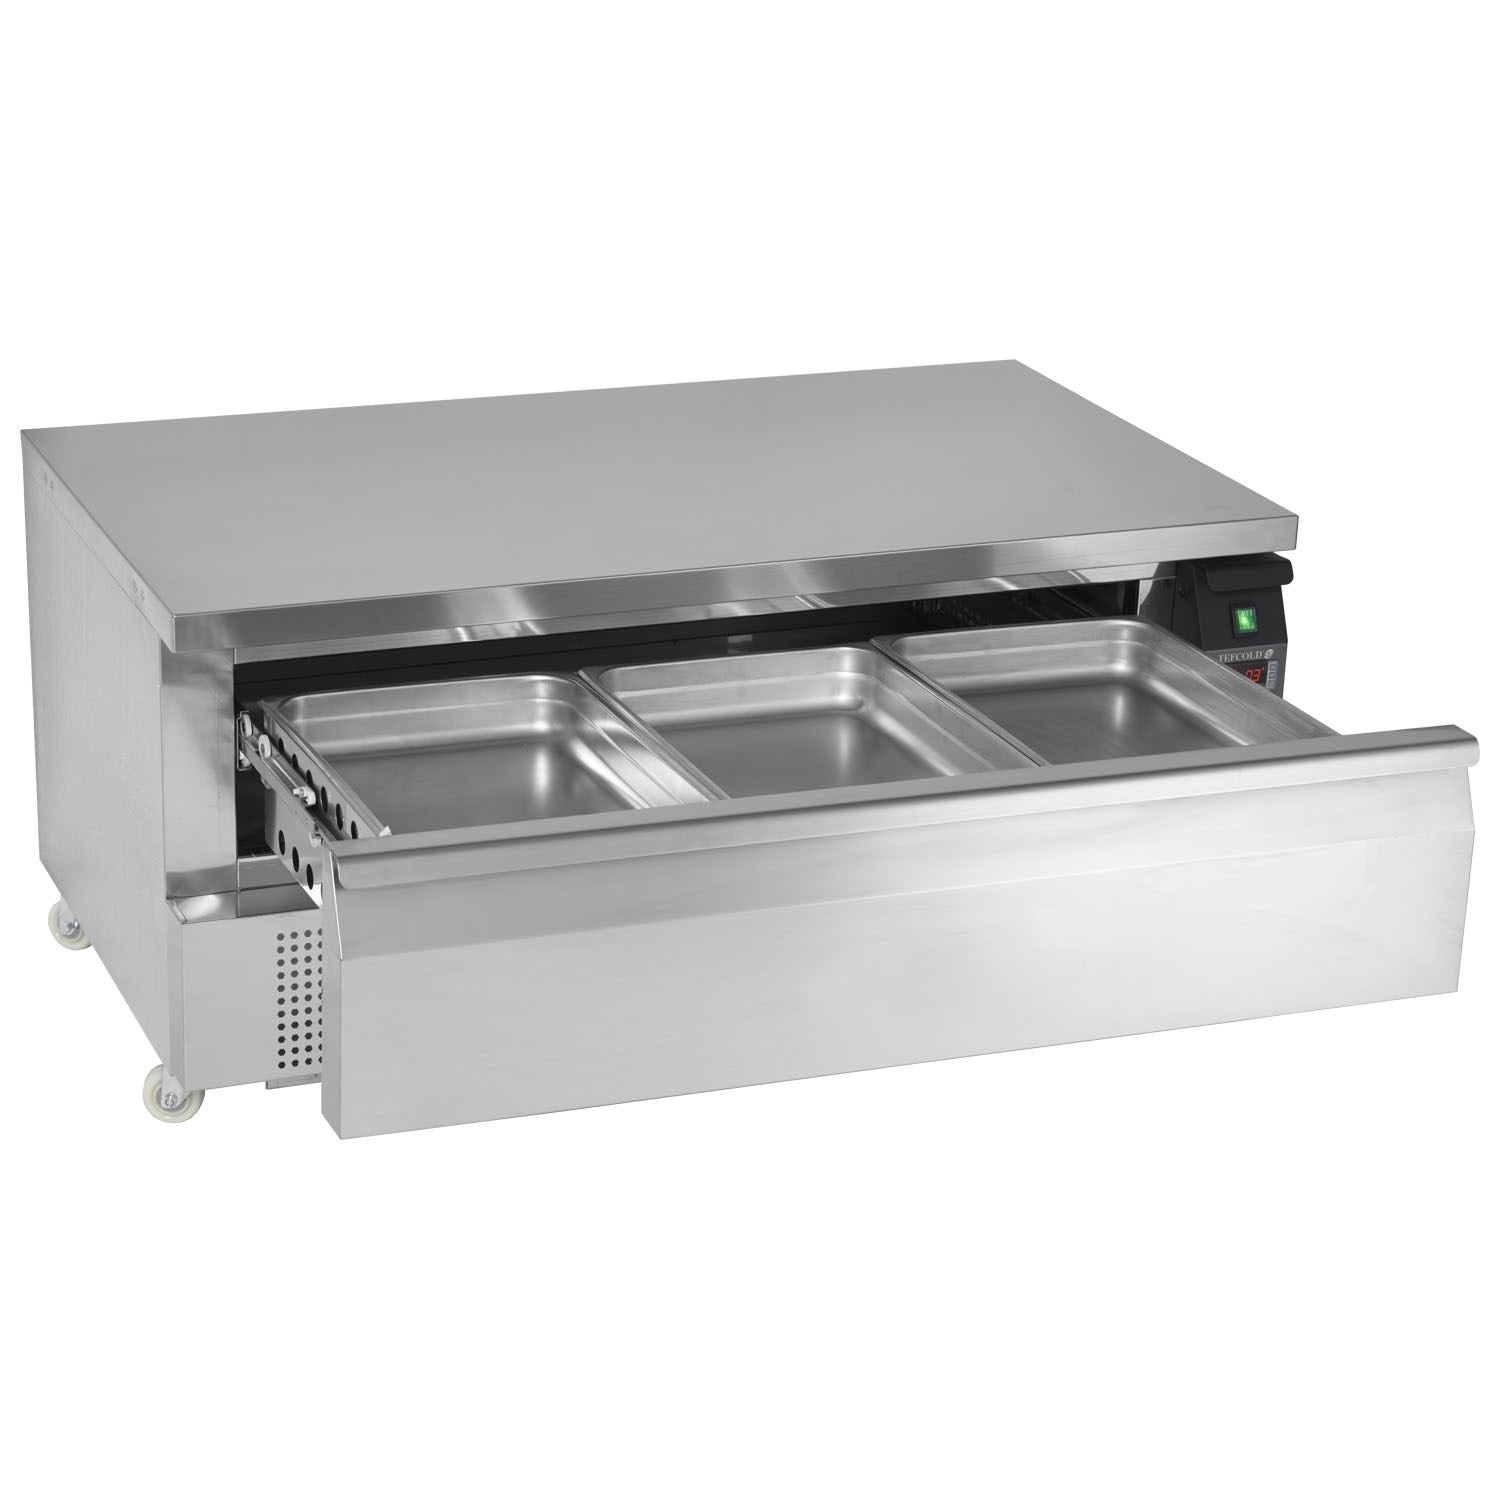 Tefcold Uni-Drawer 1 Range Dual Temperature Gastronorm Counter.Product Ref:00807.Model:UD1-3. 🚚 1-3 Days Delivery